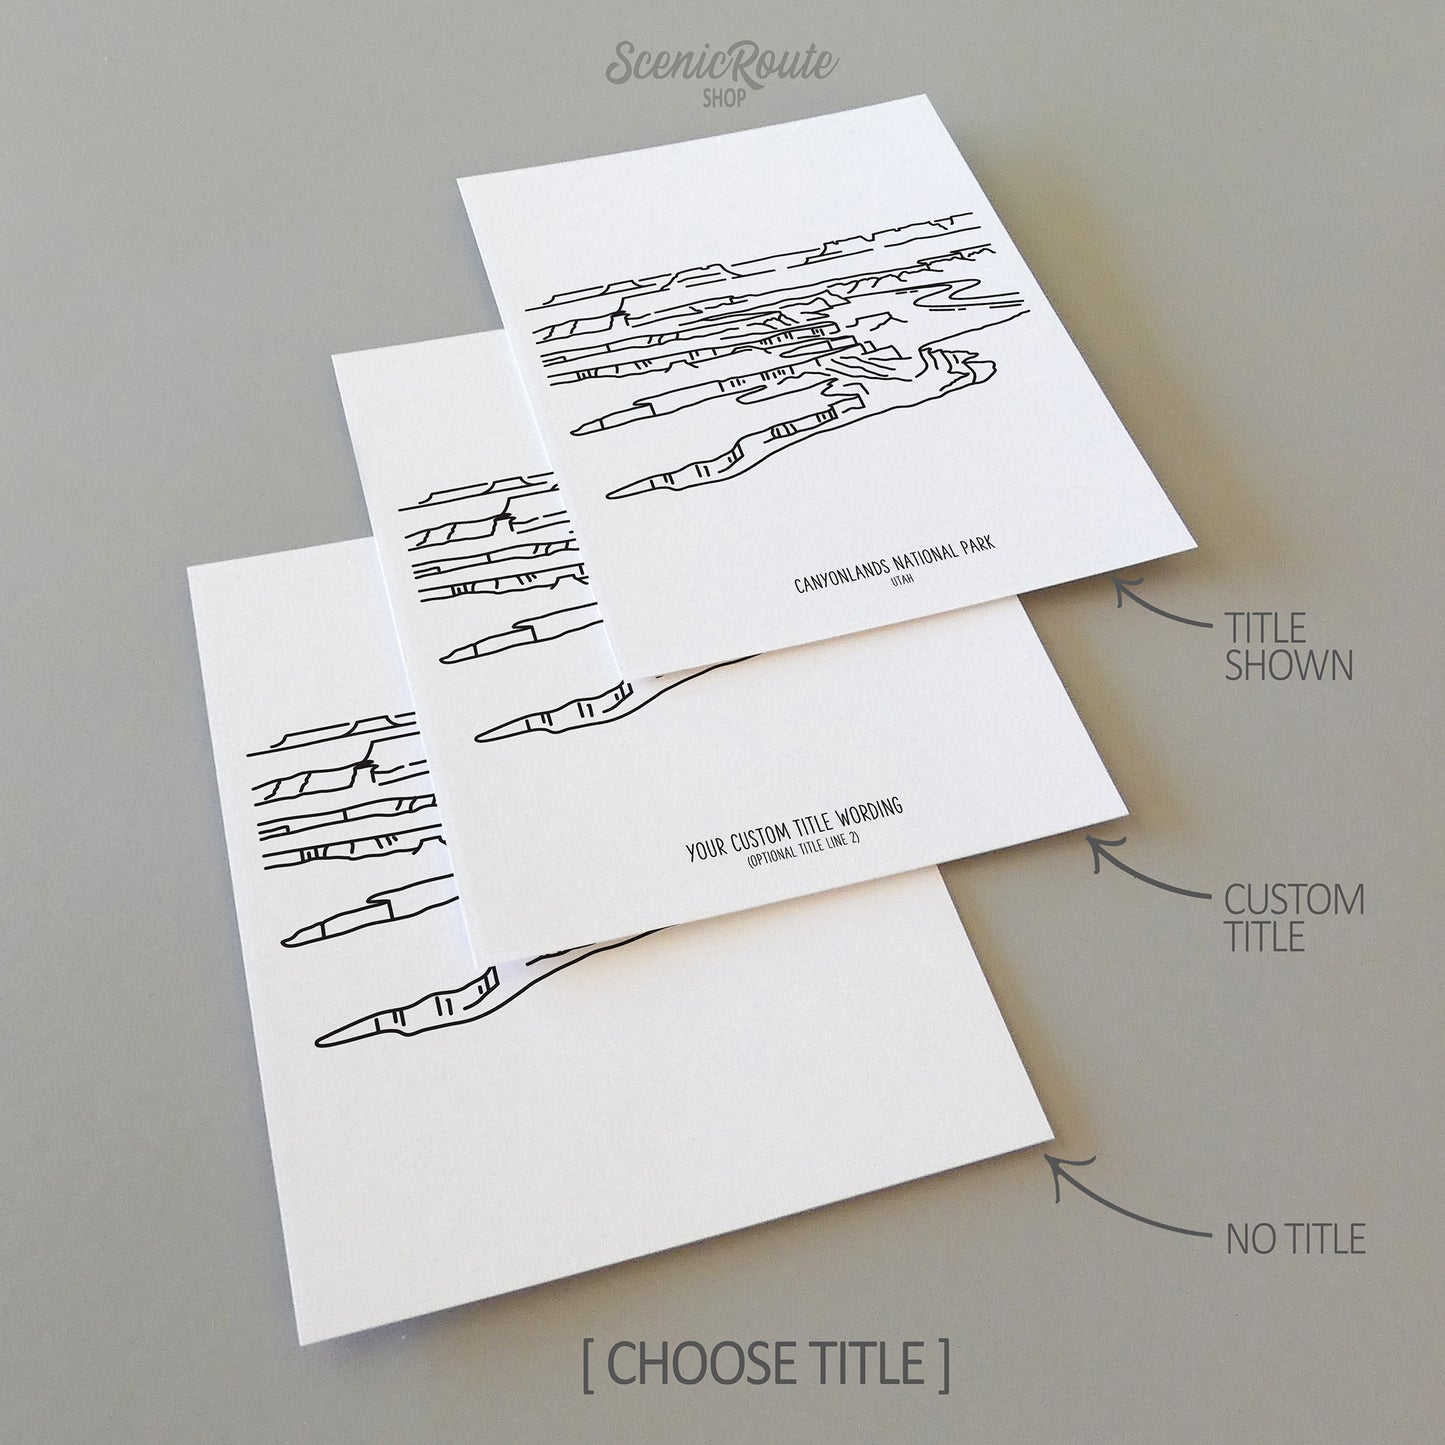 Three line art drawings of Canyonlands National Park on white linen paper with a gray background. The pieces are shown with title options that can be chosen and personalized.